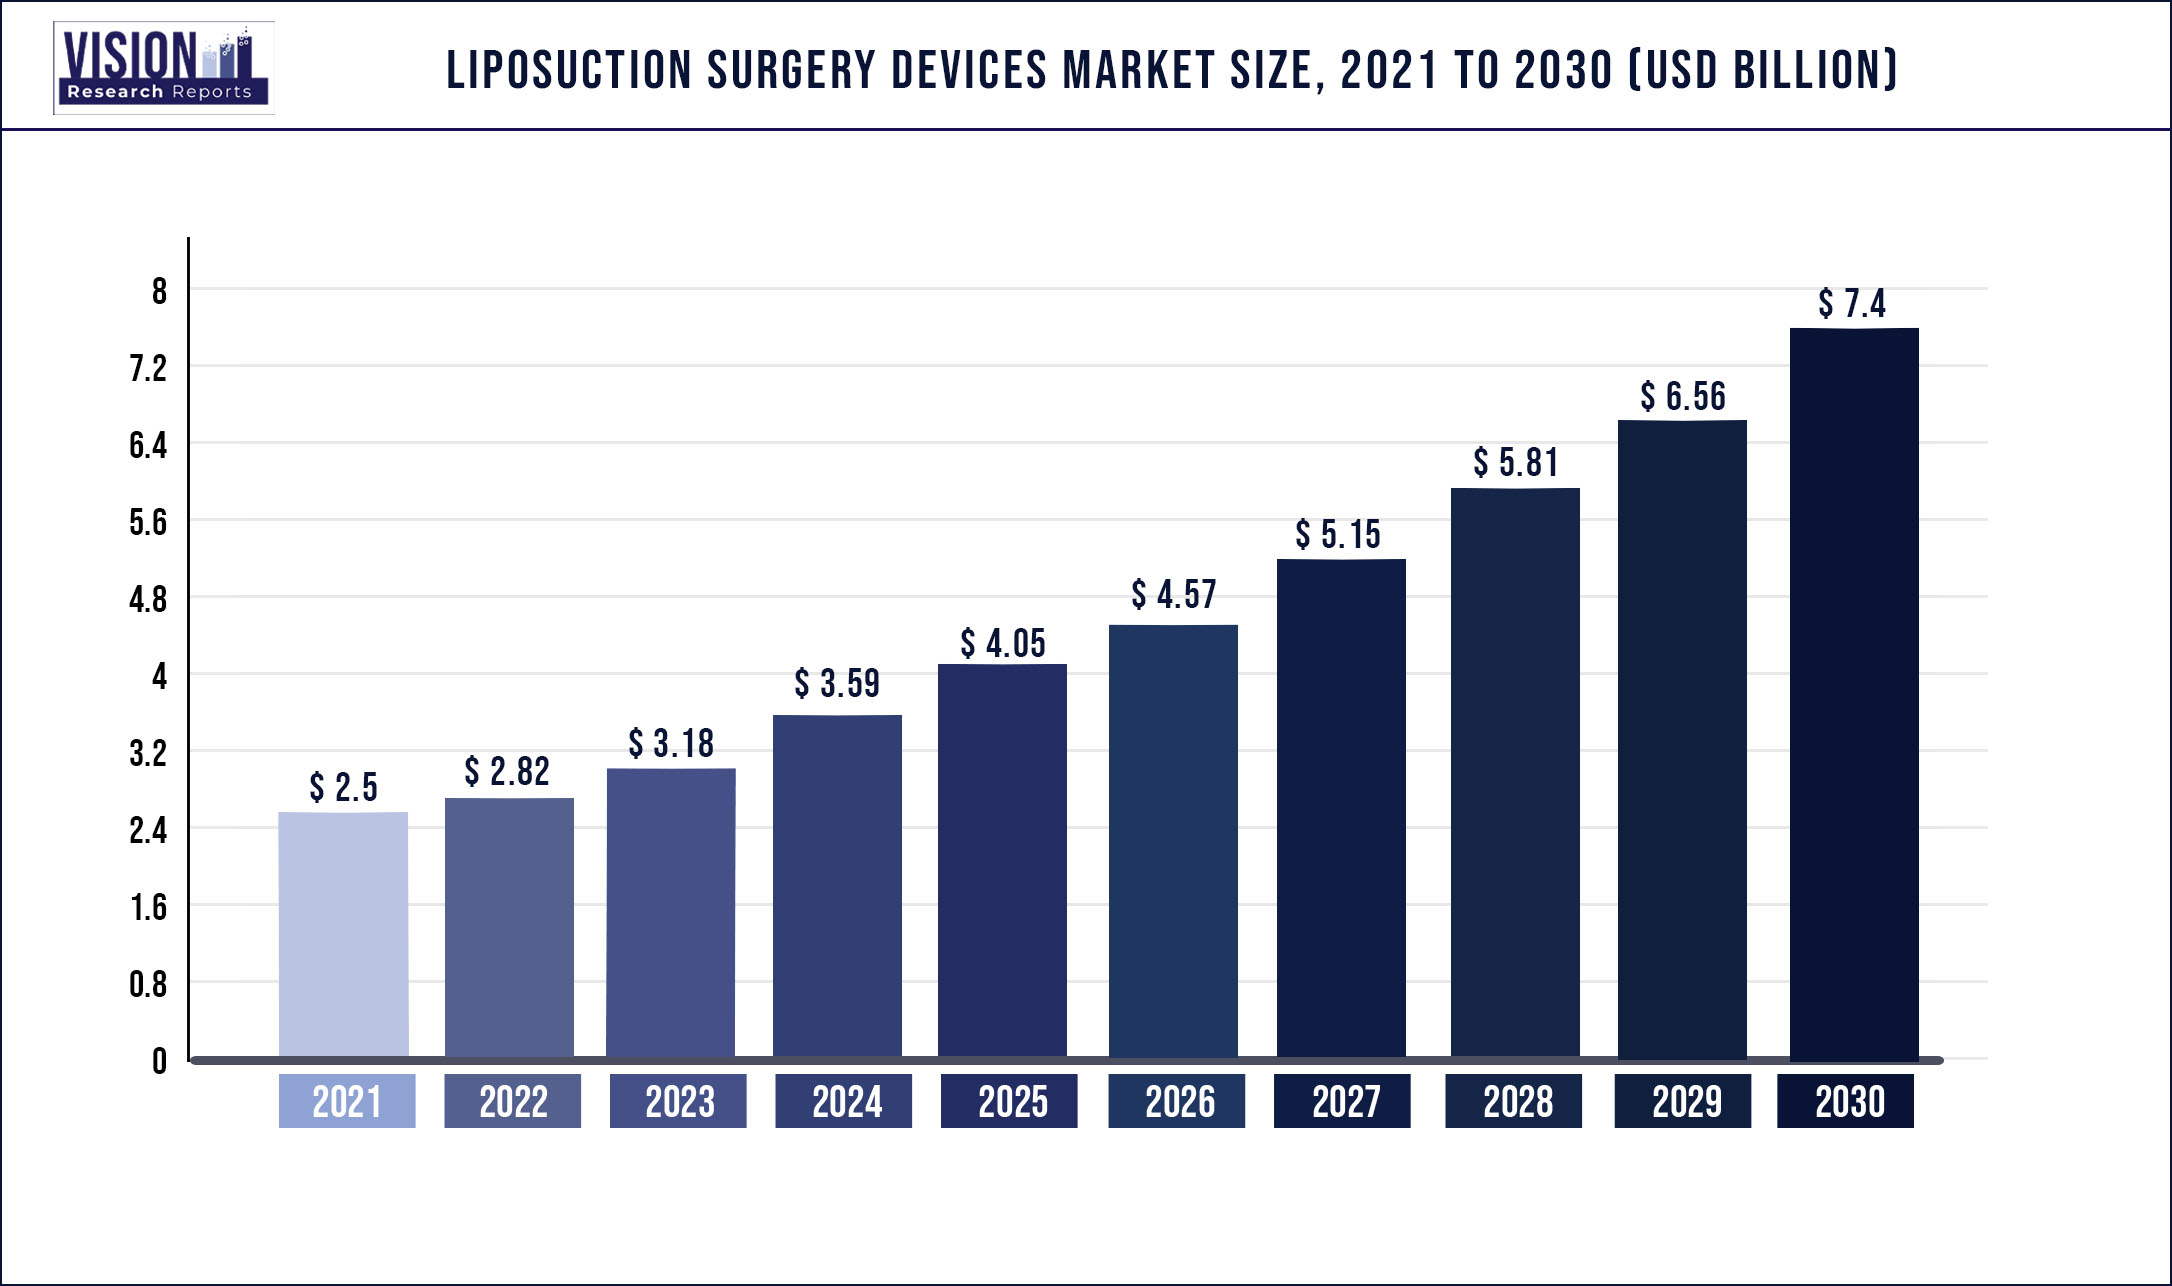 Liposuction Surgery Devices Market Size 2021 to 2030